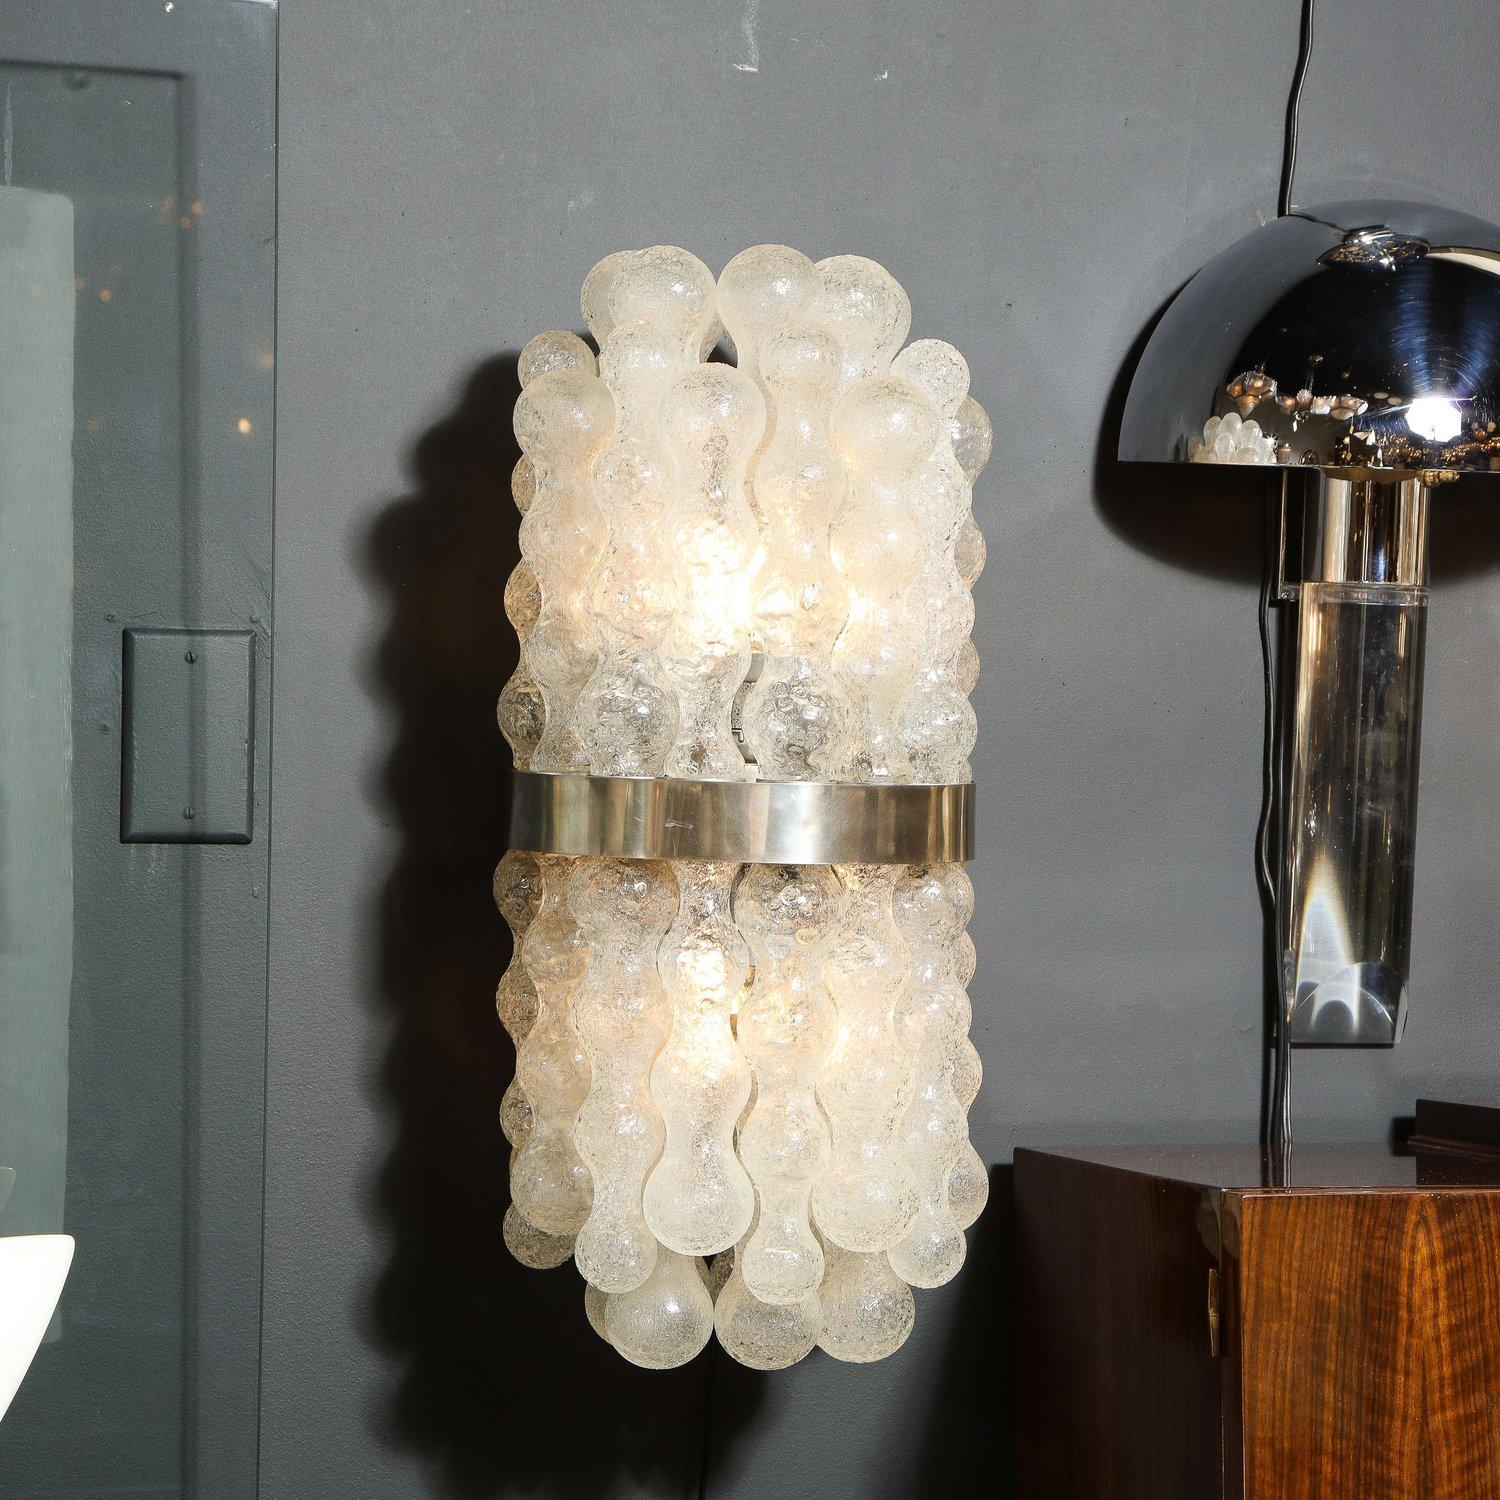 Late 20th Century Mid-Century Modern Organic Translucent Murano Glass & Brushed Aluminum Sconces For Sale